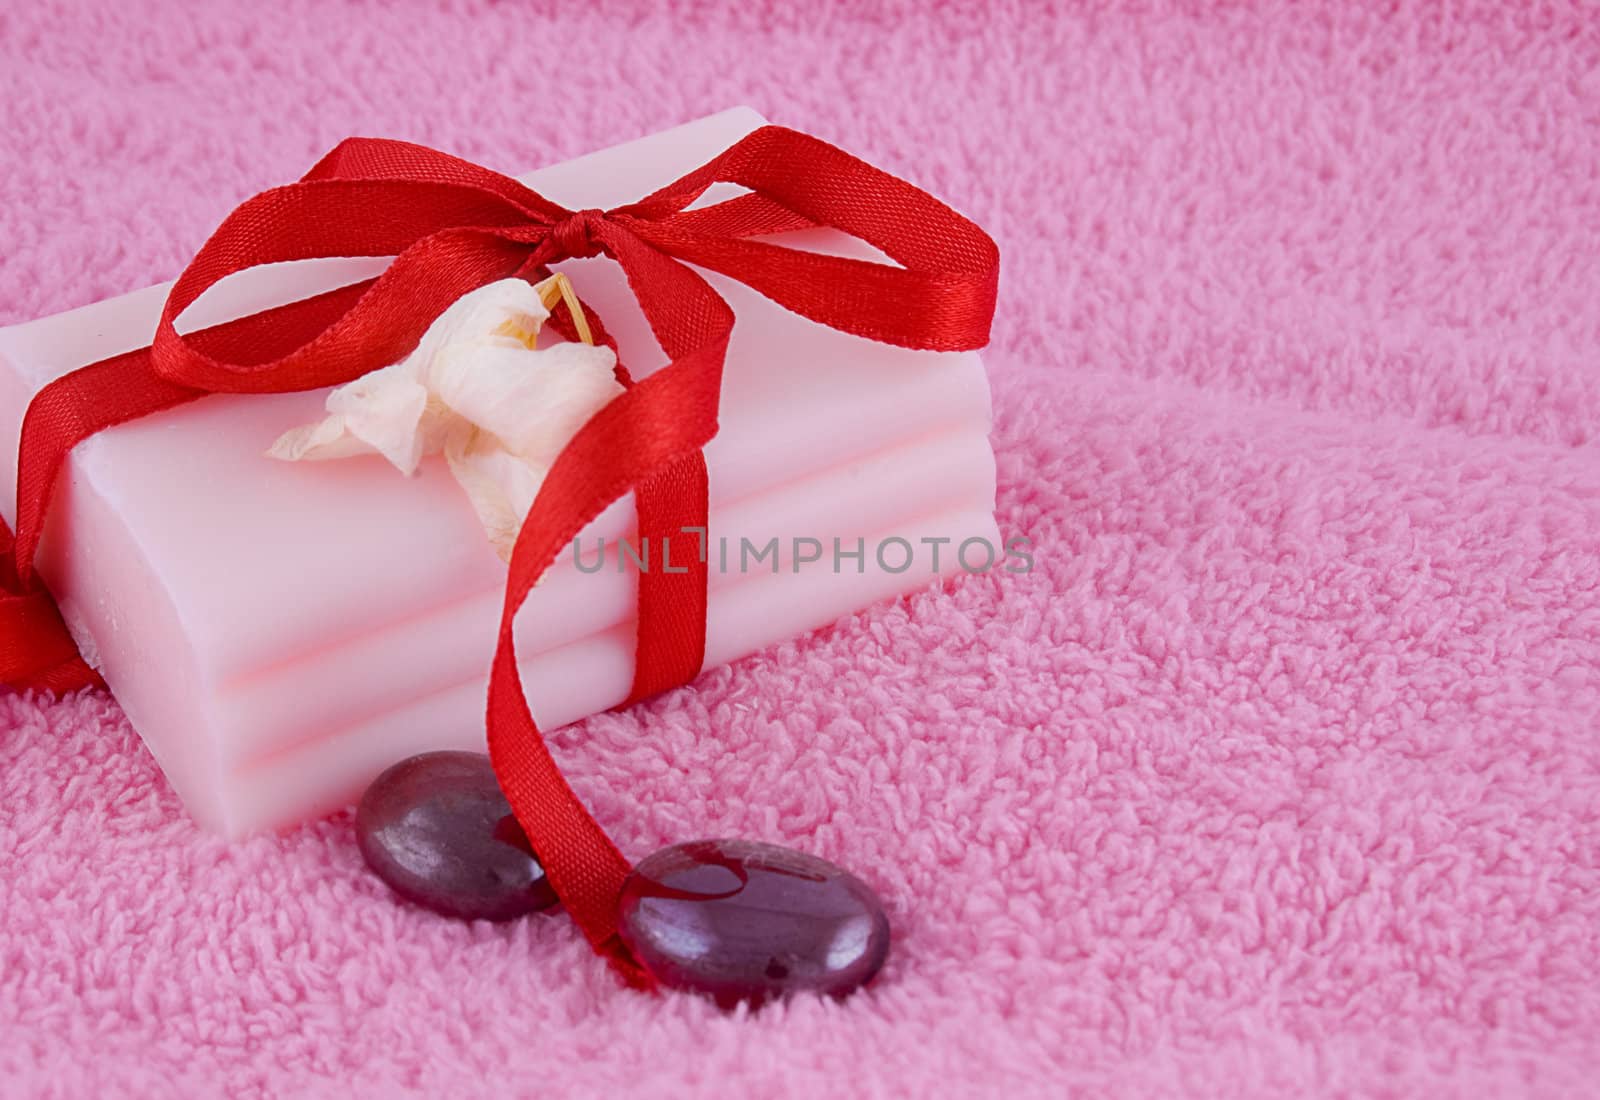 Soap with roses and stones by Angel_a